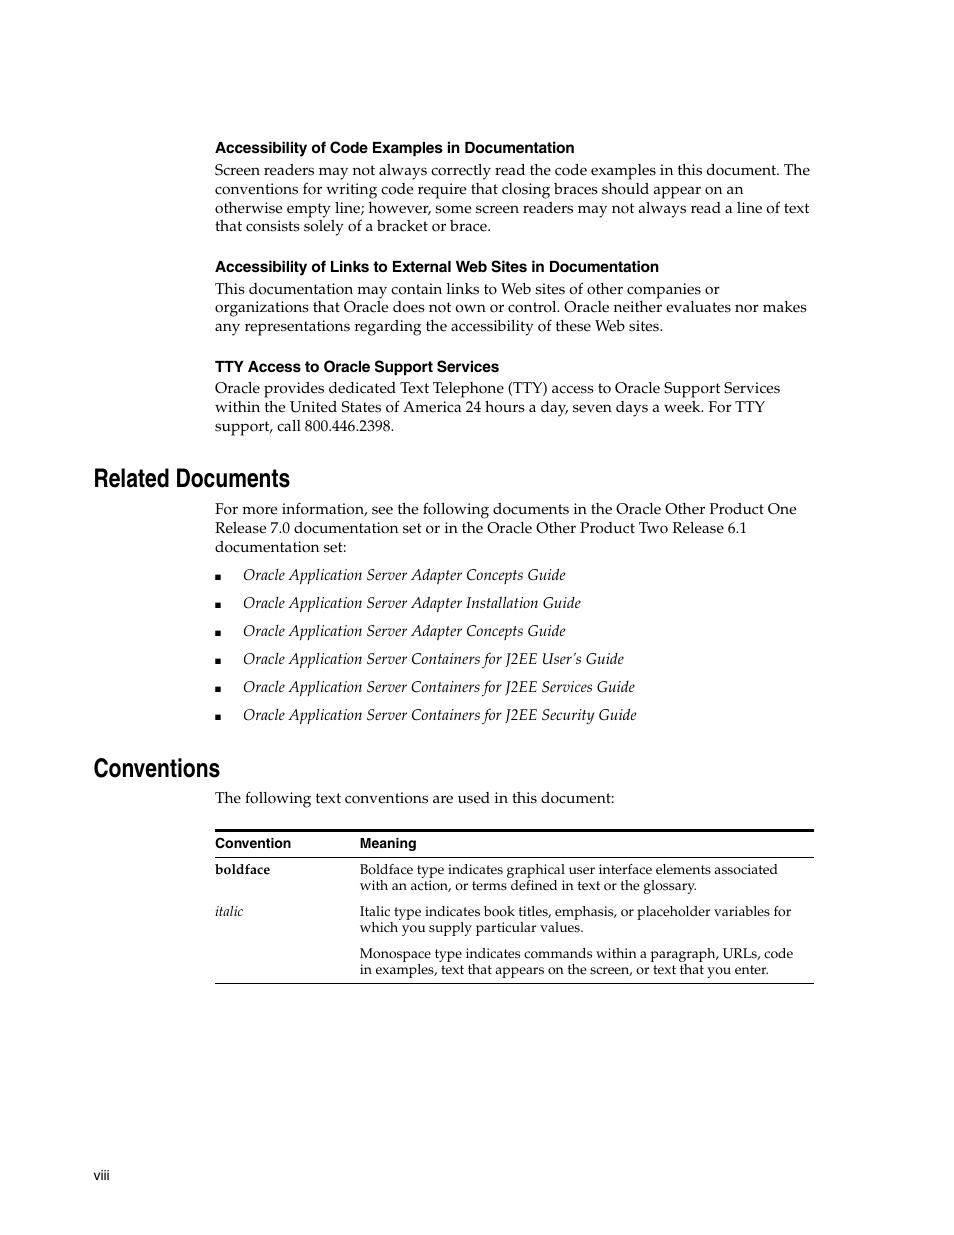 Related documents, Conventions | Oracle Audio Technologies B31003-01 User Manual | Page 8 / 112